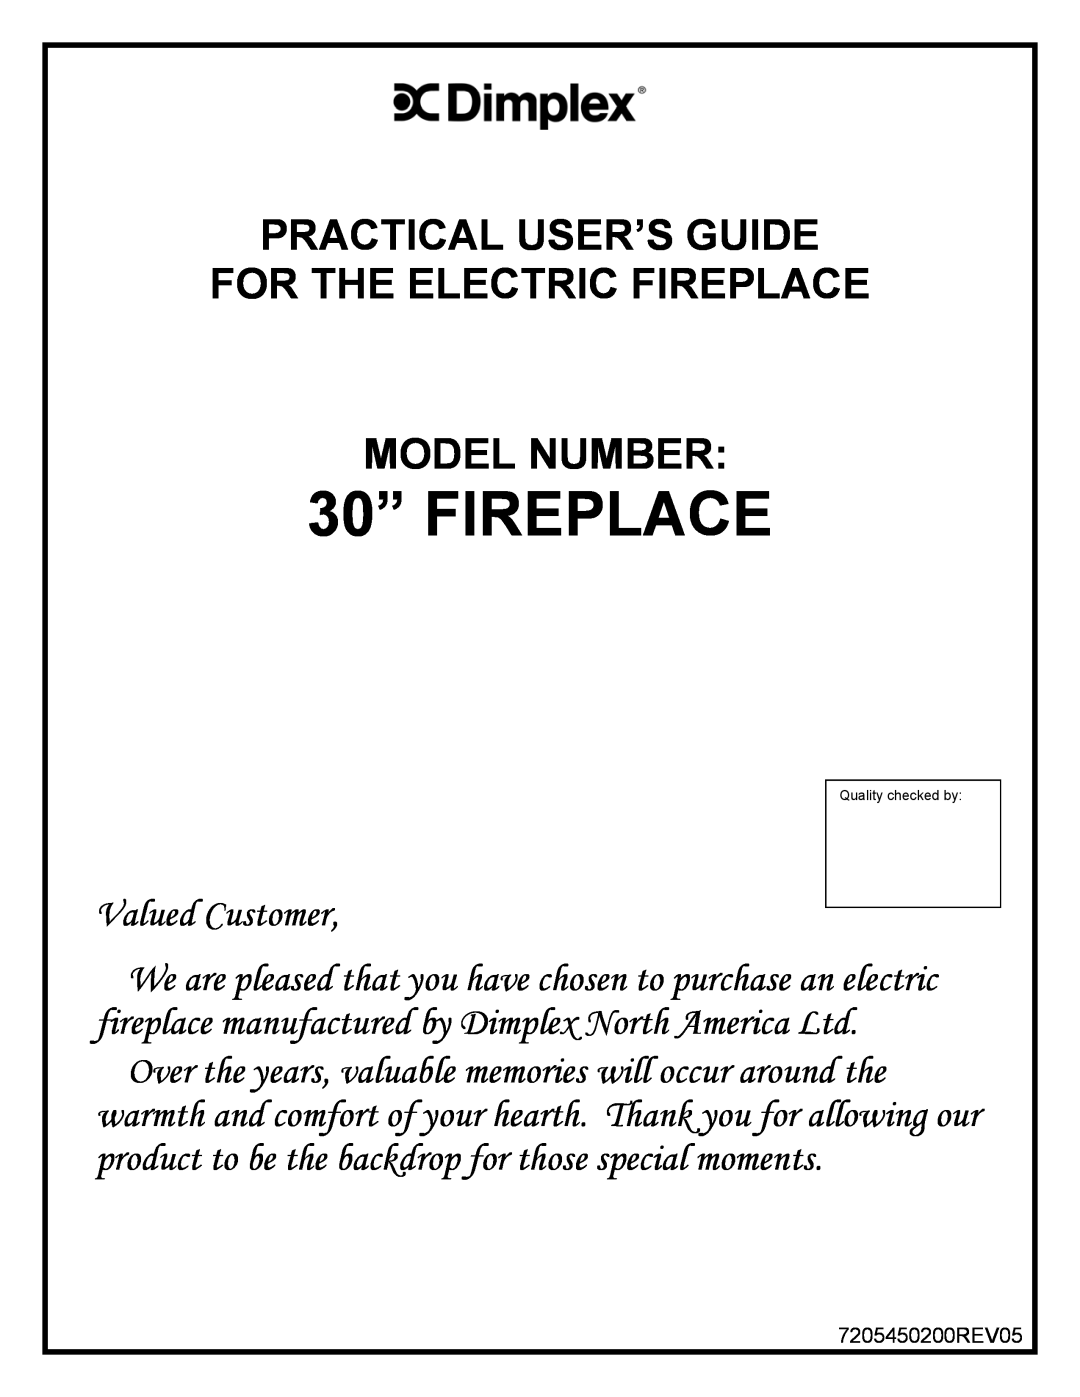 Dimplex SF3003, DF3003 manual 30” FIREPLACE, Practical User’S Guide For The Electric Fireplace, Model Number 